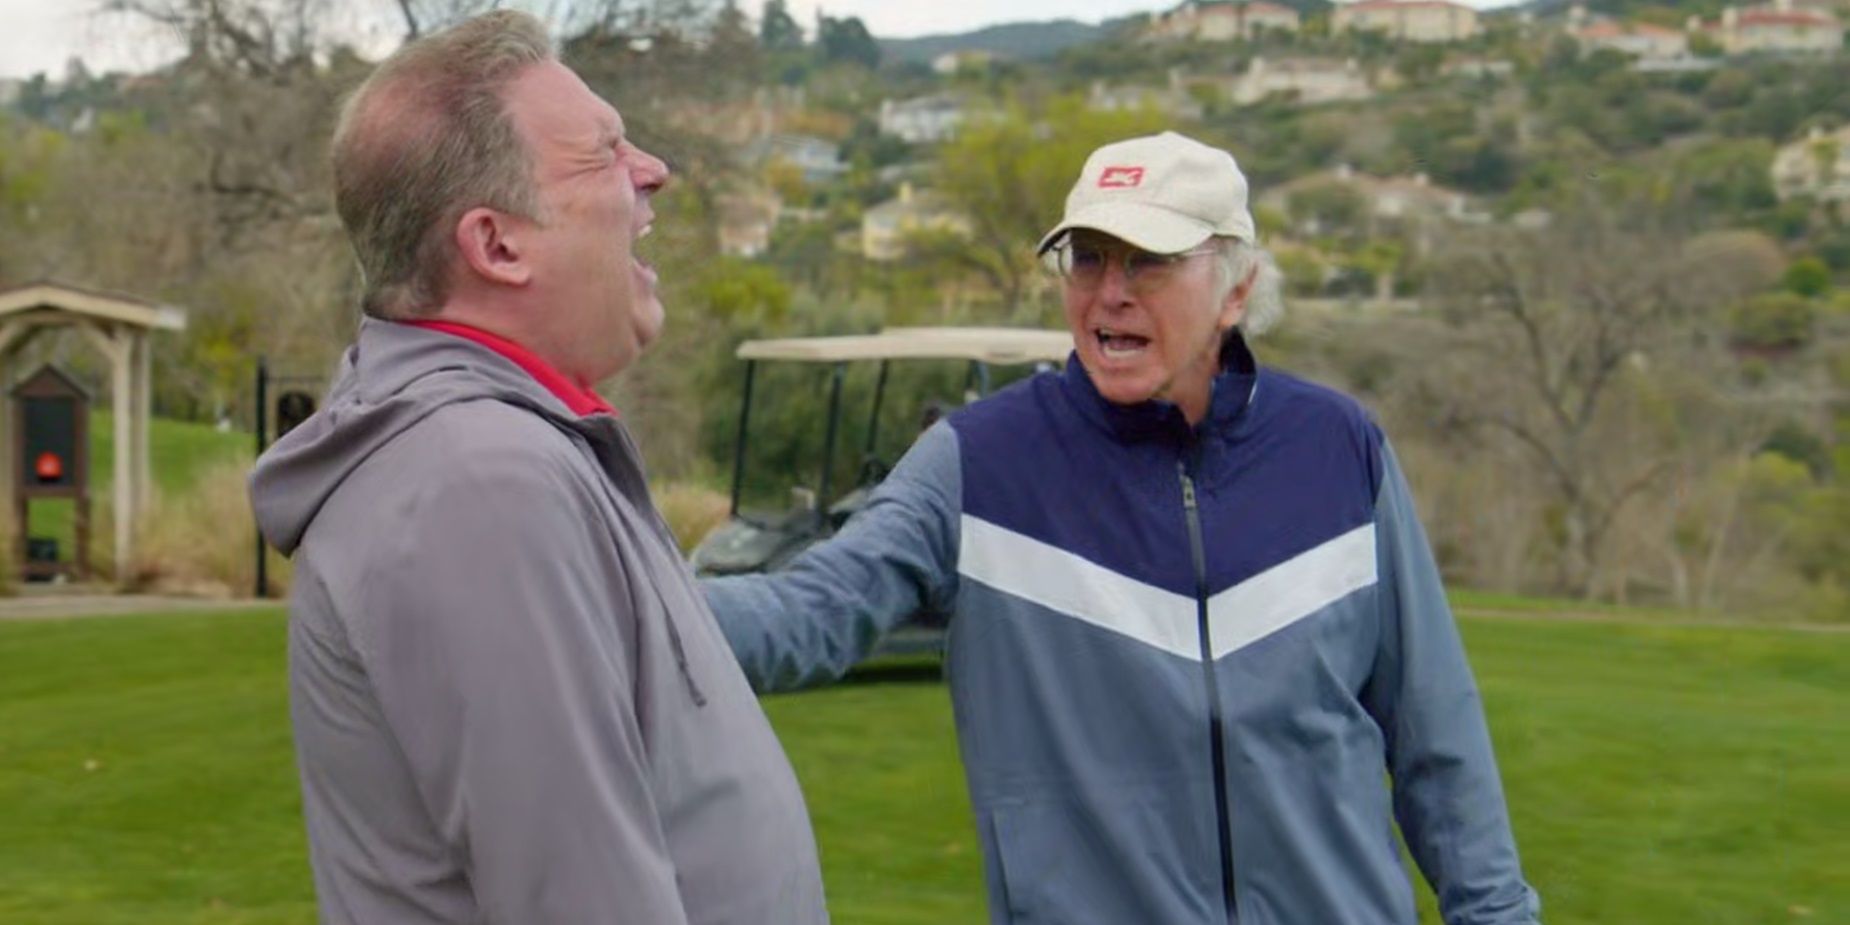 Larry and Jeff on the golf course in Curb Your Enthusiasm